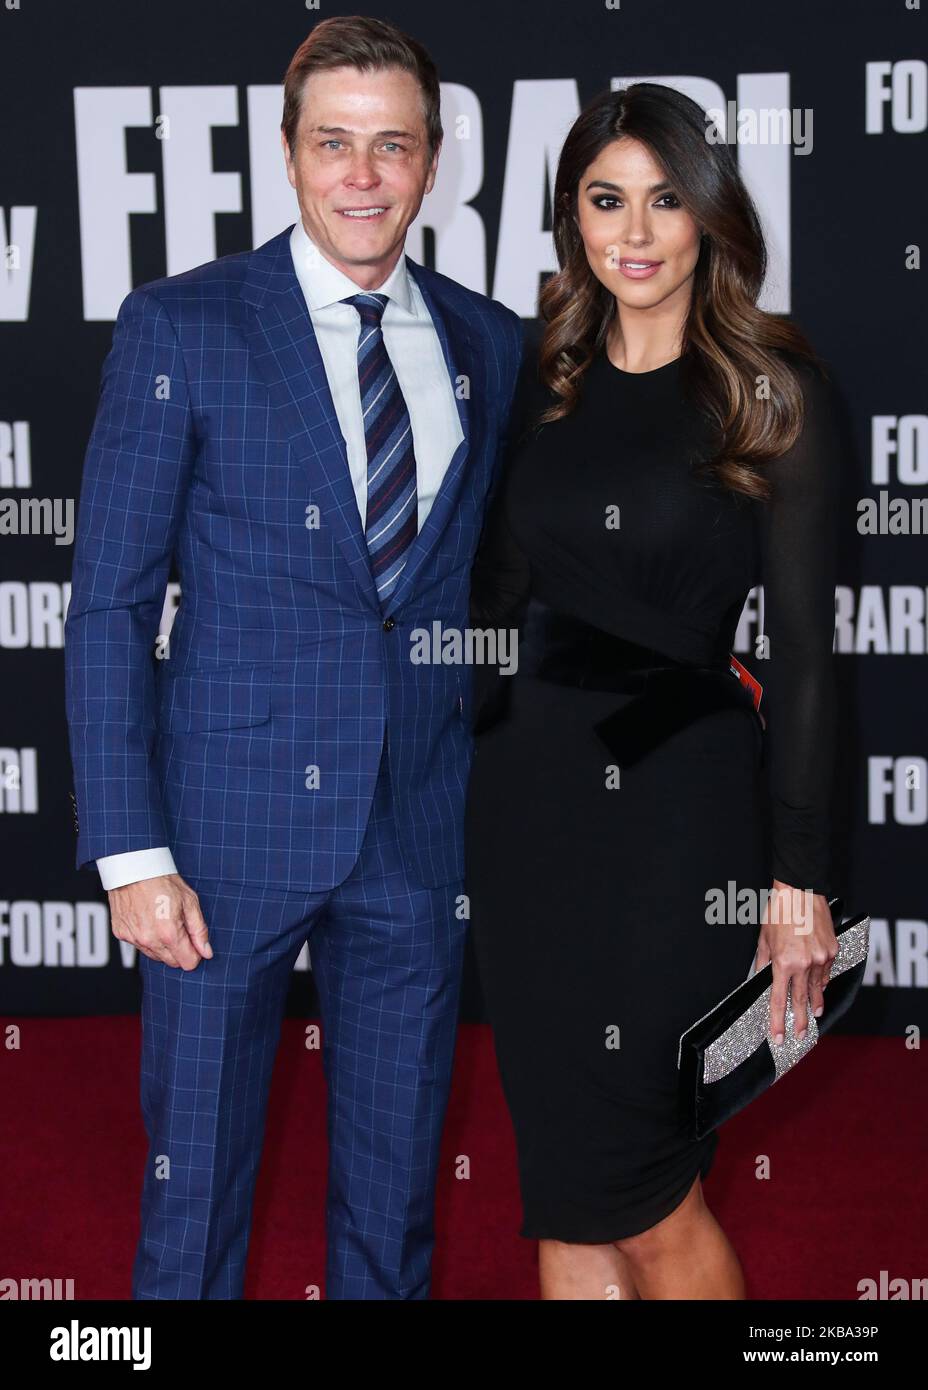 HOLLYWOOD, LOS ANGELES, CALIFORNIA, USA - NOVEMBER 04: Co-CEO of William Morris Endeavor Patrick Whitesell and Pia Miller arrive at the Los Angeles Premiere Of 20th Century Fox's 'Ford v Ferrari' held at the TCL Chinese Theatre IMAX on November 4, 2019 in Hollywood, Los Angeles, California, United States. (Photo by Xavier Collin/Image Press Agency/NurPhoto) Stock Photo